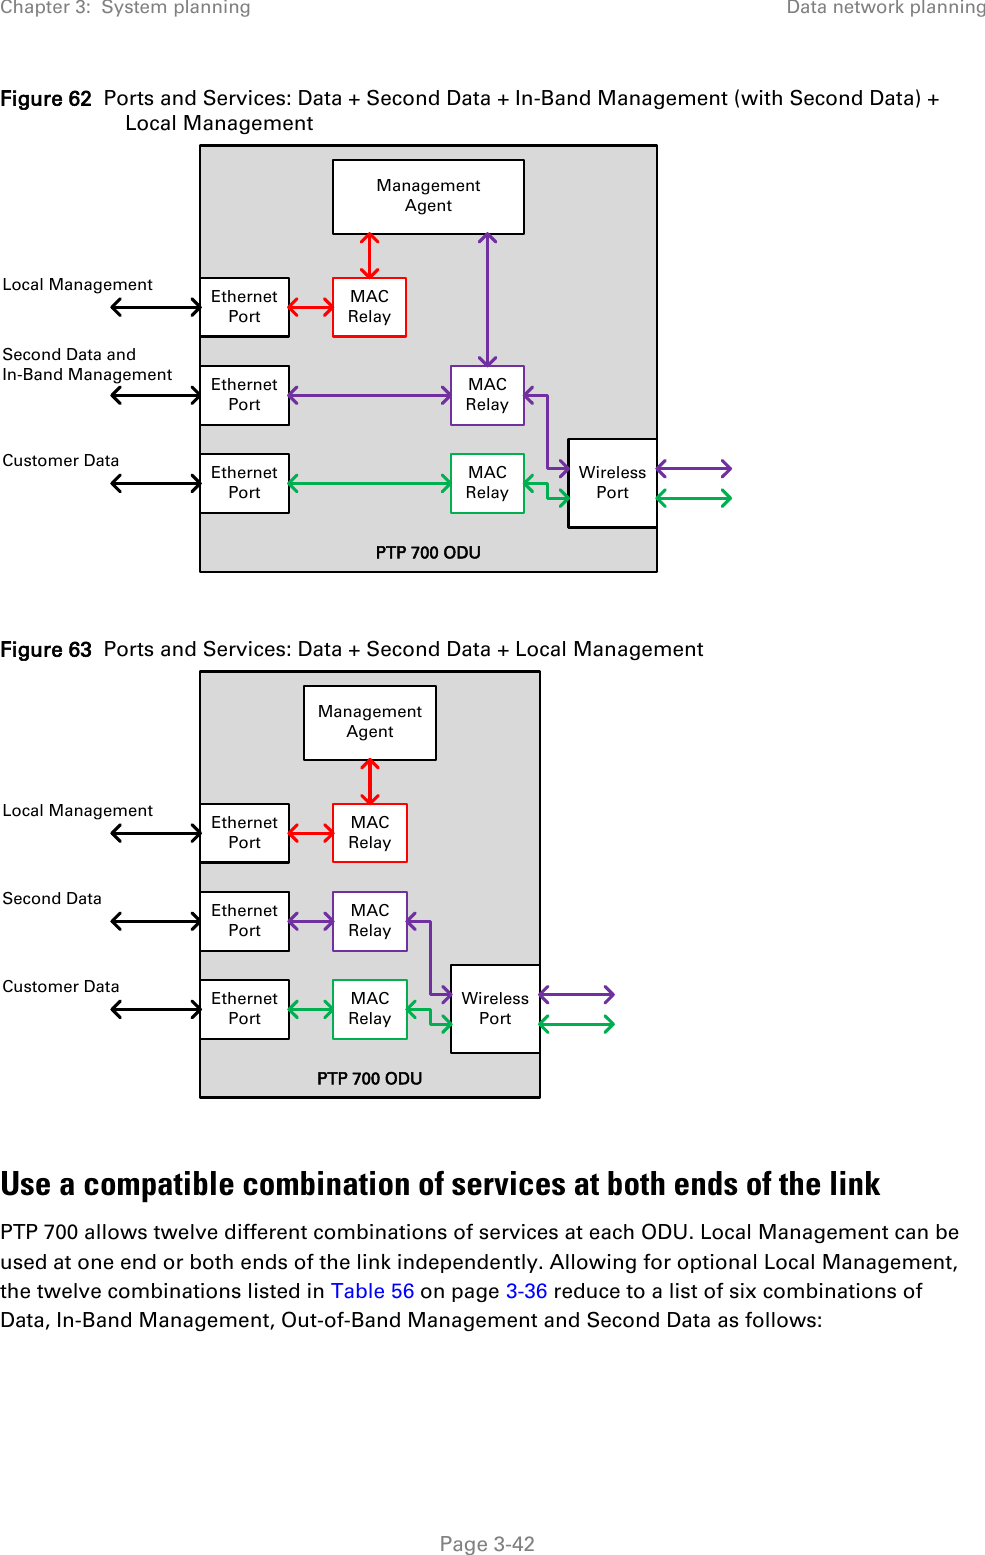 Chapter 3:  System planning Data network planning  Figure 62  Ports and Services: Data + Second Data + In-Band Management (with Second Data) + Local Management   Figure 63  Ports and Services: Data + Second Data + Local Management   Use a compatible combination of services at both ends of the link PTP 700 allows twelve different combinations of services at each ODU. Local Management can be used at one end or both ends of the link independently. Allowing for optional Local Management, the twelve combinations listed in Table 56 on page 3-36 reduce to a list of six combinations of Data, In-Band Management, Out-of-Band Management and Second Data as follows:  PTP 700 ODUManagementAgentEthernetPortEthernetPortEthernetPortMAC RelayLocal ManagementMAC RelayCustomer DataEthernetPortMAC RelaySecond Data andIn-Band ManagementWirelessPortPTP 700 ODUManagementAgentEthernetPortEthernetPortEthernetPortMAC RelayCustomer DataEthernetPortMAC RelayWirelessPortSecond DataMAC RelayLocal Management Page 3-42 